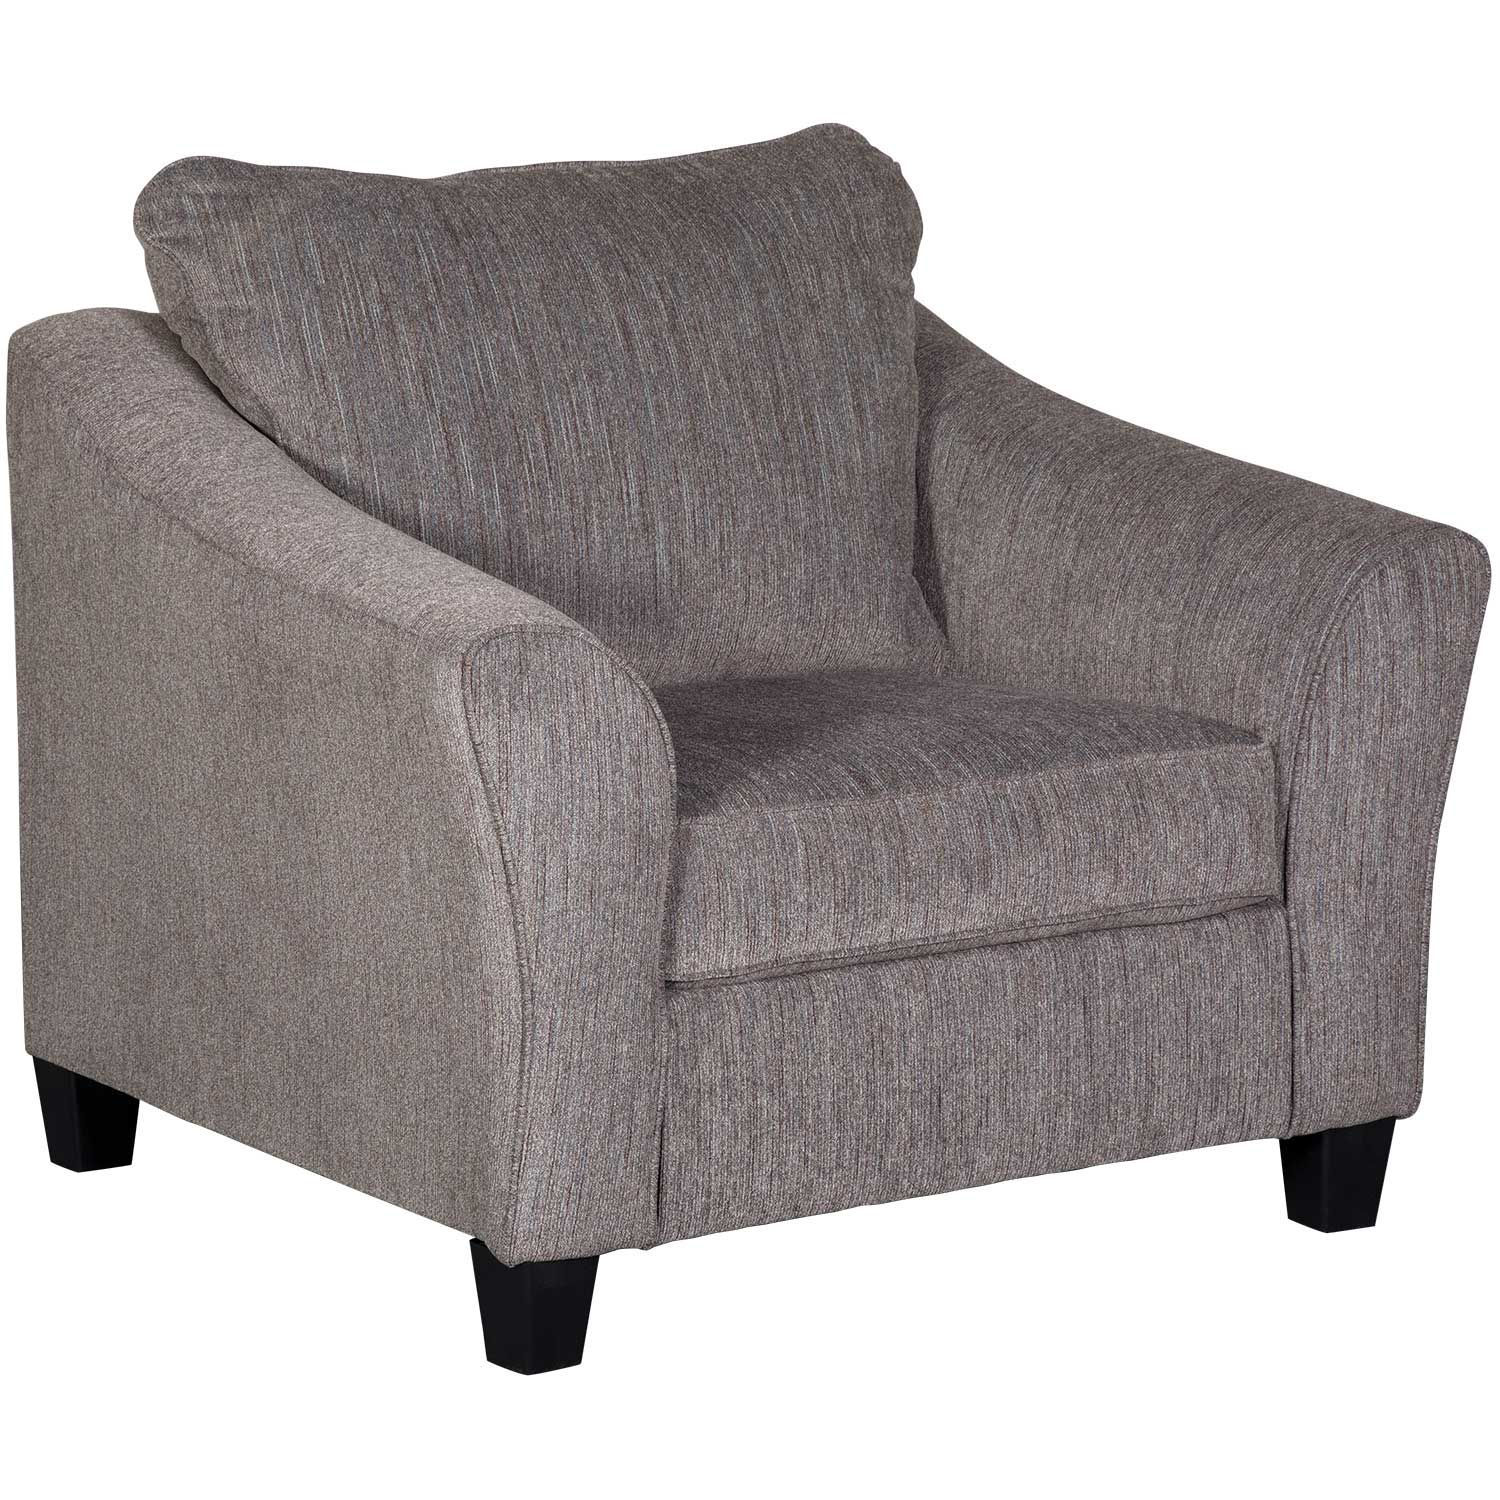 Nemoli Slate Chair And A Half 4580623 Ashley Furniture Afw Com,How Much Is A Silver Quarter Worth Right Now